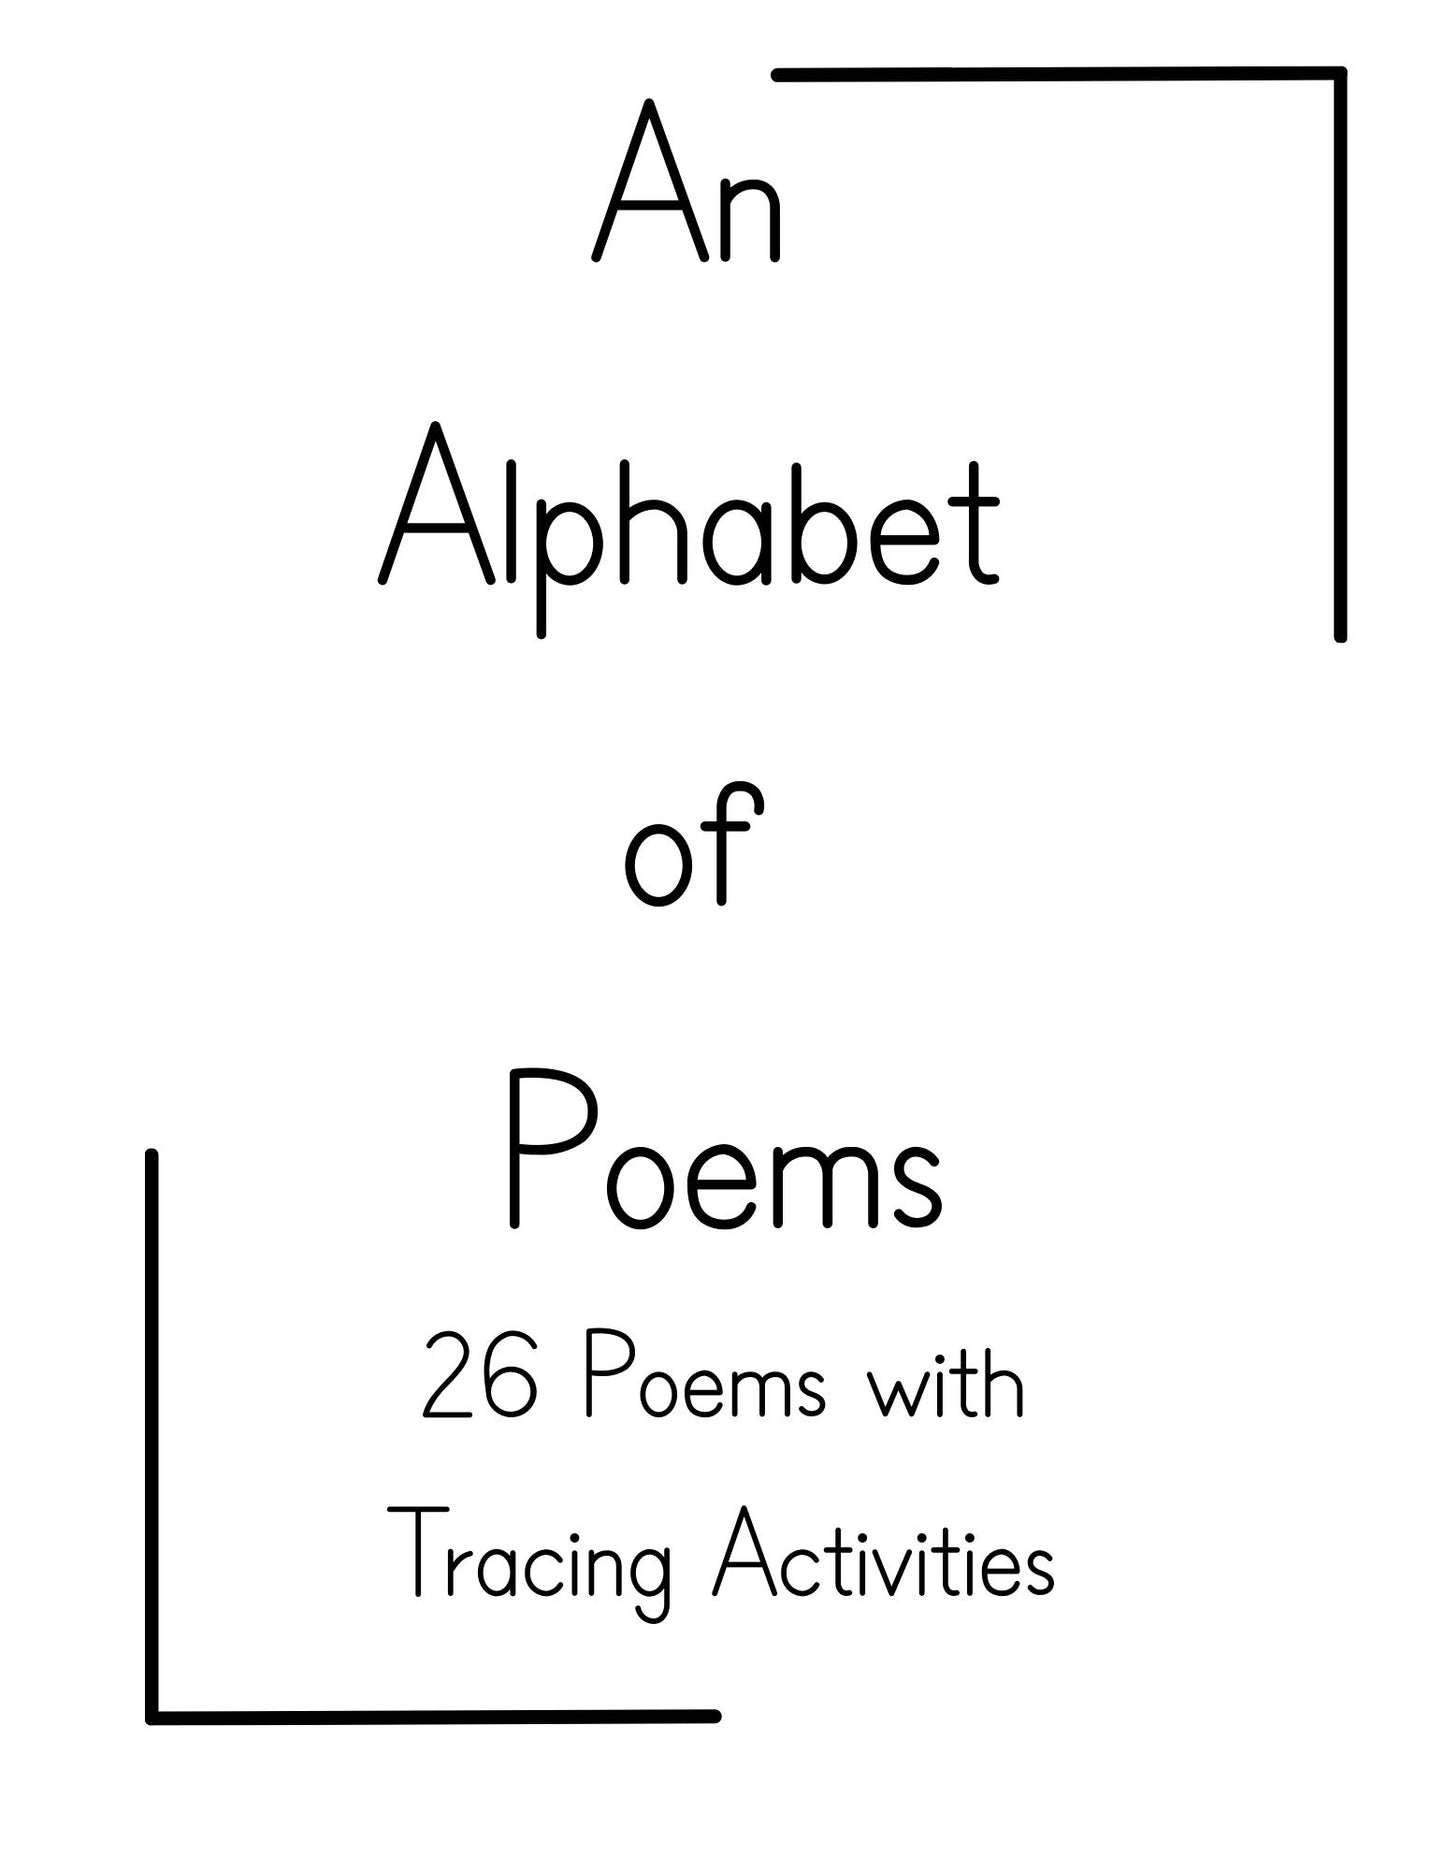 Alphabet of Poems from A to Z